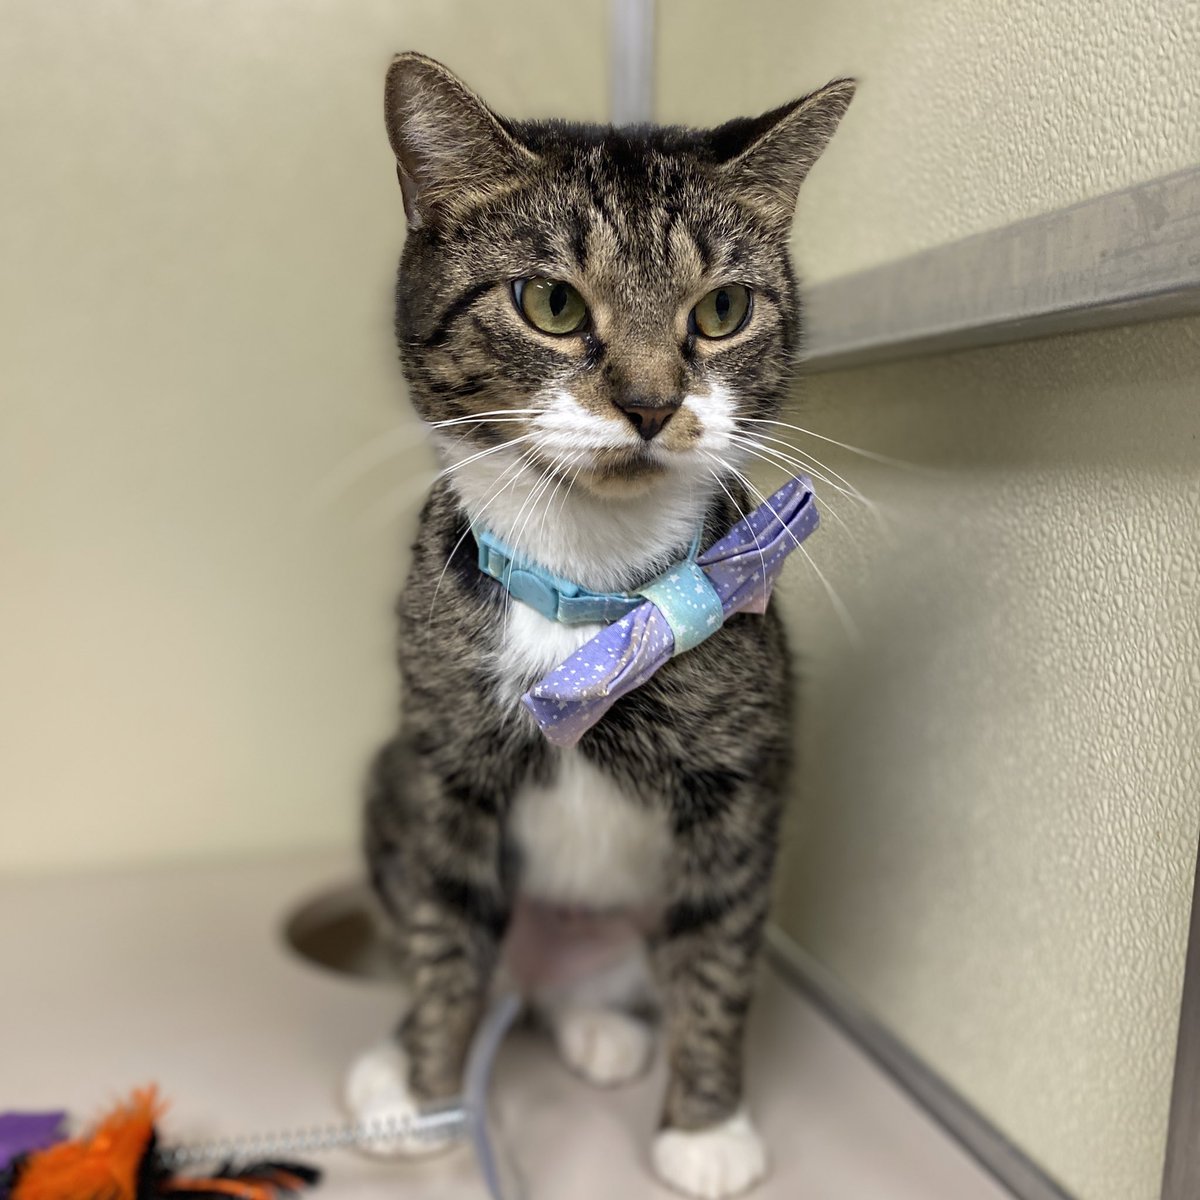 Beldam is a petite four year old kitty who is looking for a home. She has beautiful green eyes and a little round face. Beldam would love a home where she is cherished. 

📍 Blackwood, NJ

#catsofinstagram #cats #adoptacat